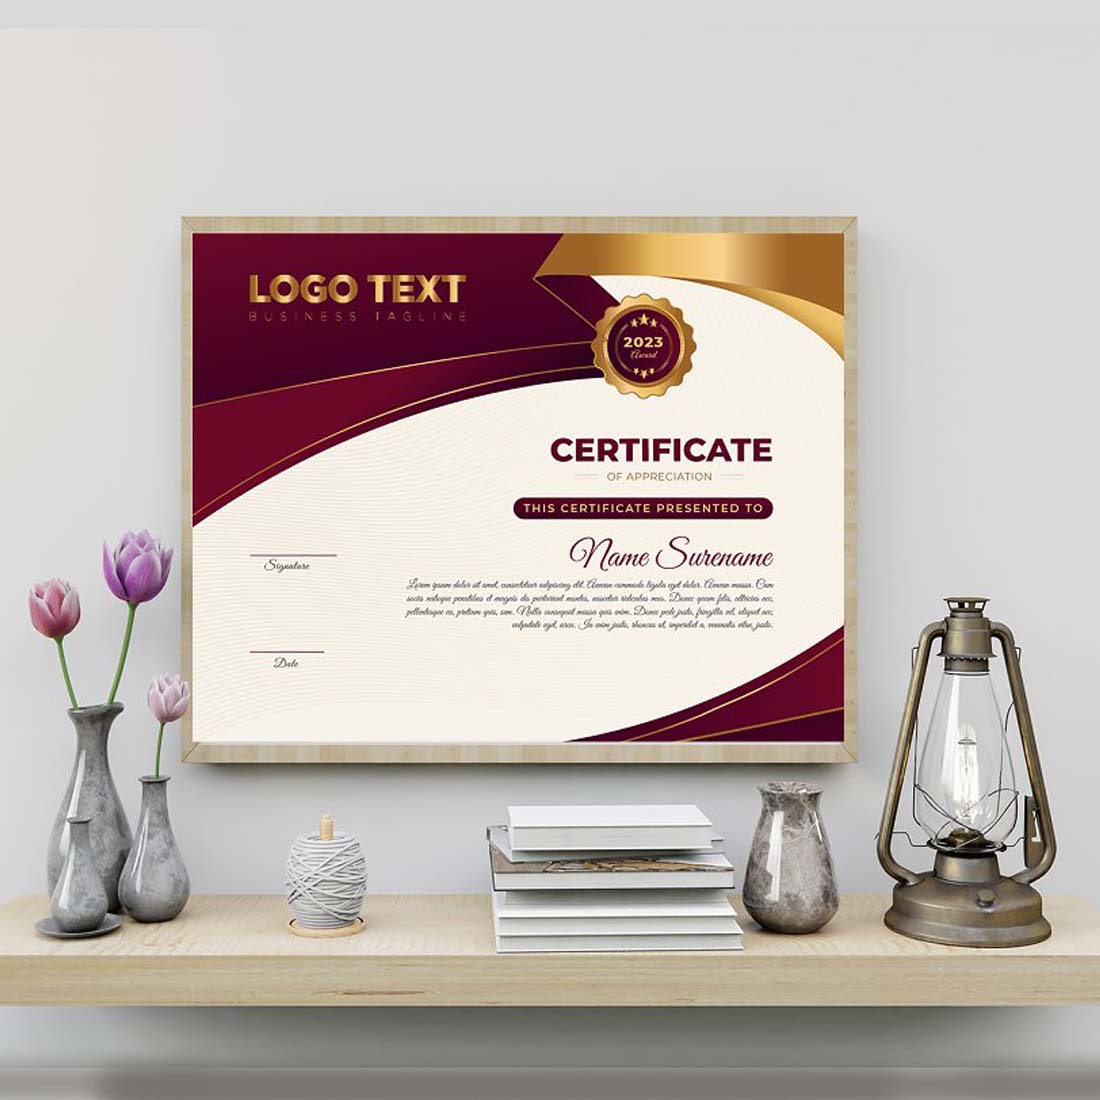 Luxury Design Certificate Template preview image.